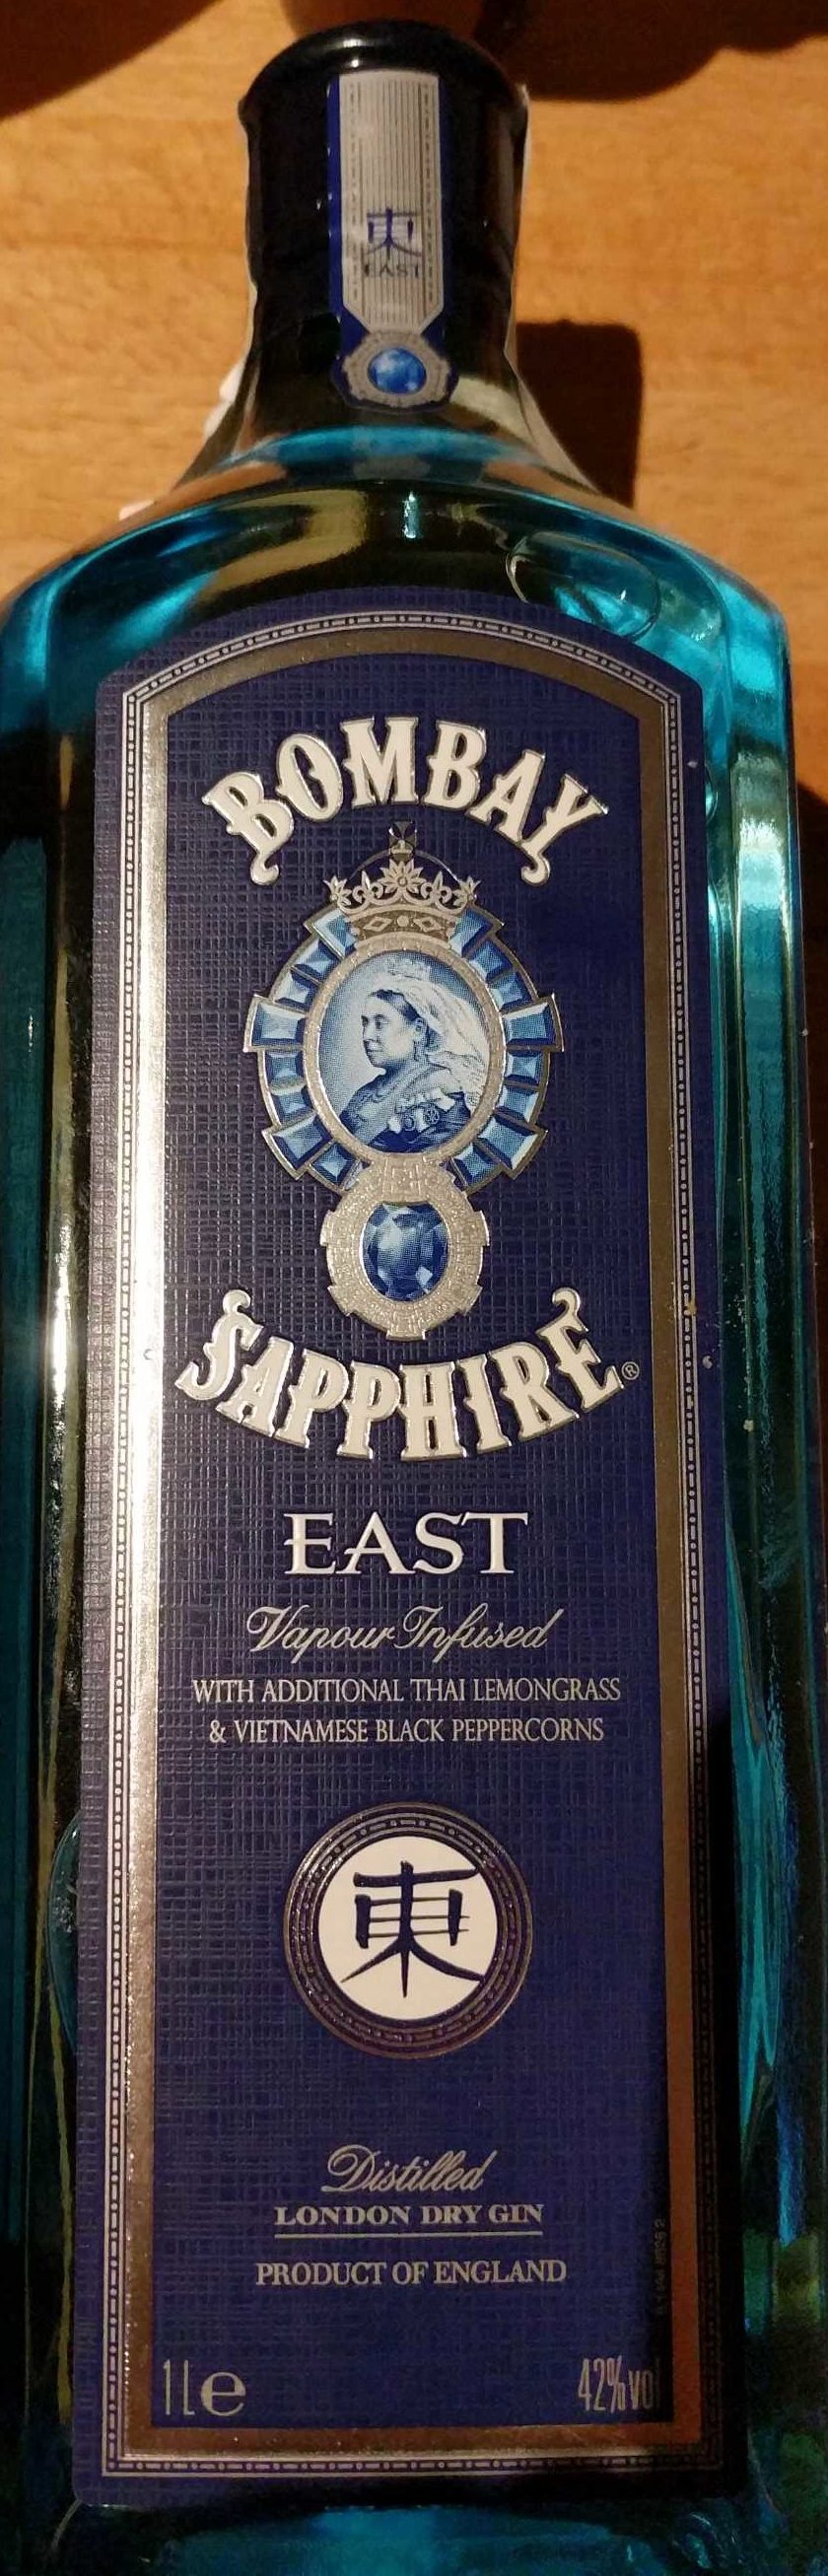 East Vapour Infused London Dry Gin - Produkt